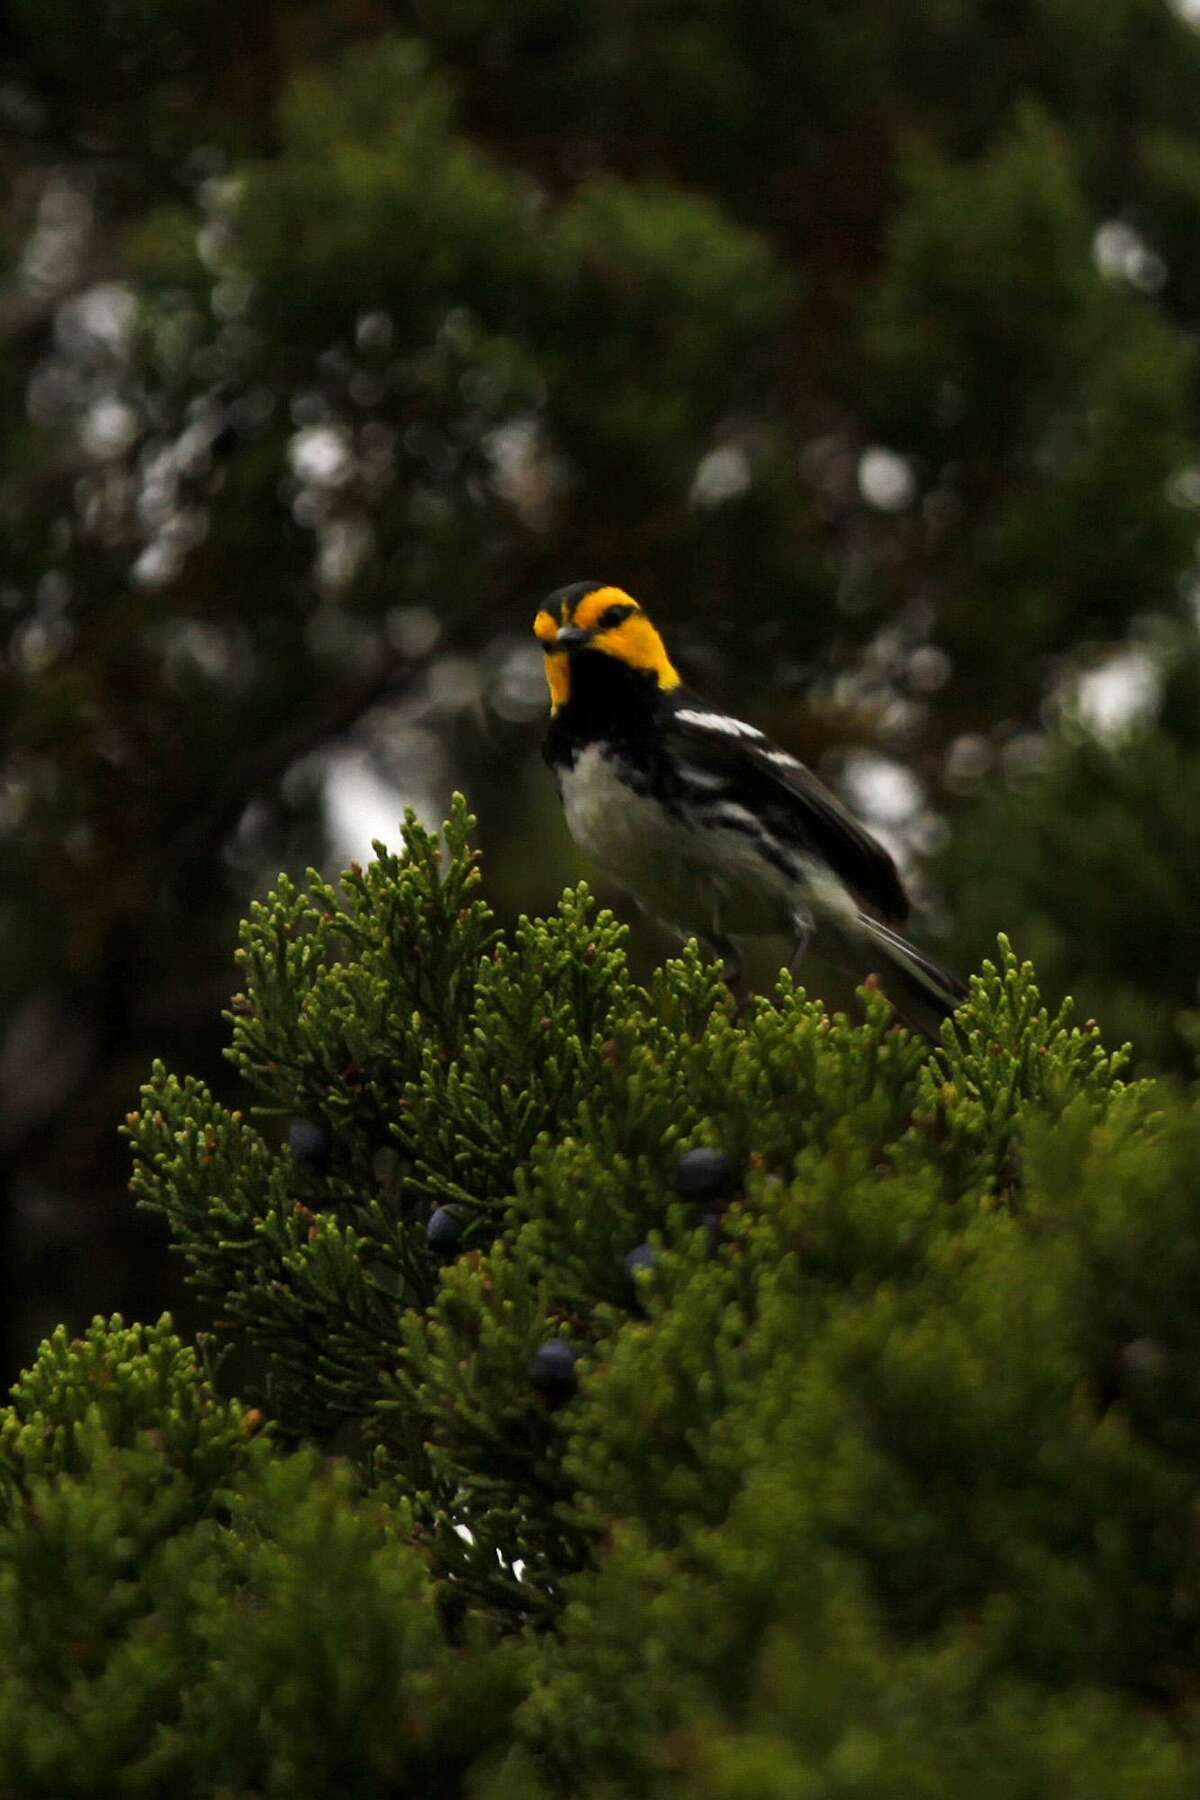 metro - A Golden-cheeked Warbler is perched on an Ashe juniper tree in the conservation easement on 57-acres of hilltop property in The Dominion on Saturday, April 2, 2011. LISA KRANTZ/lkrantz@express-news.net